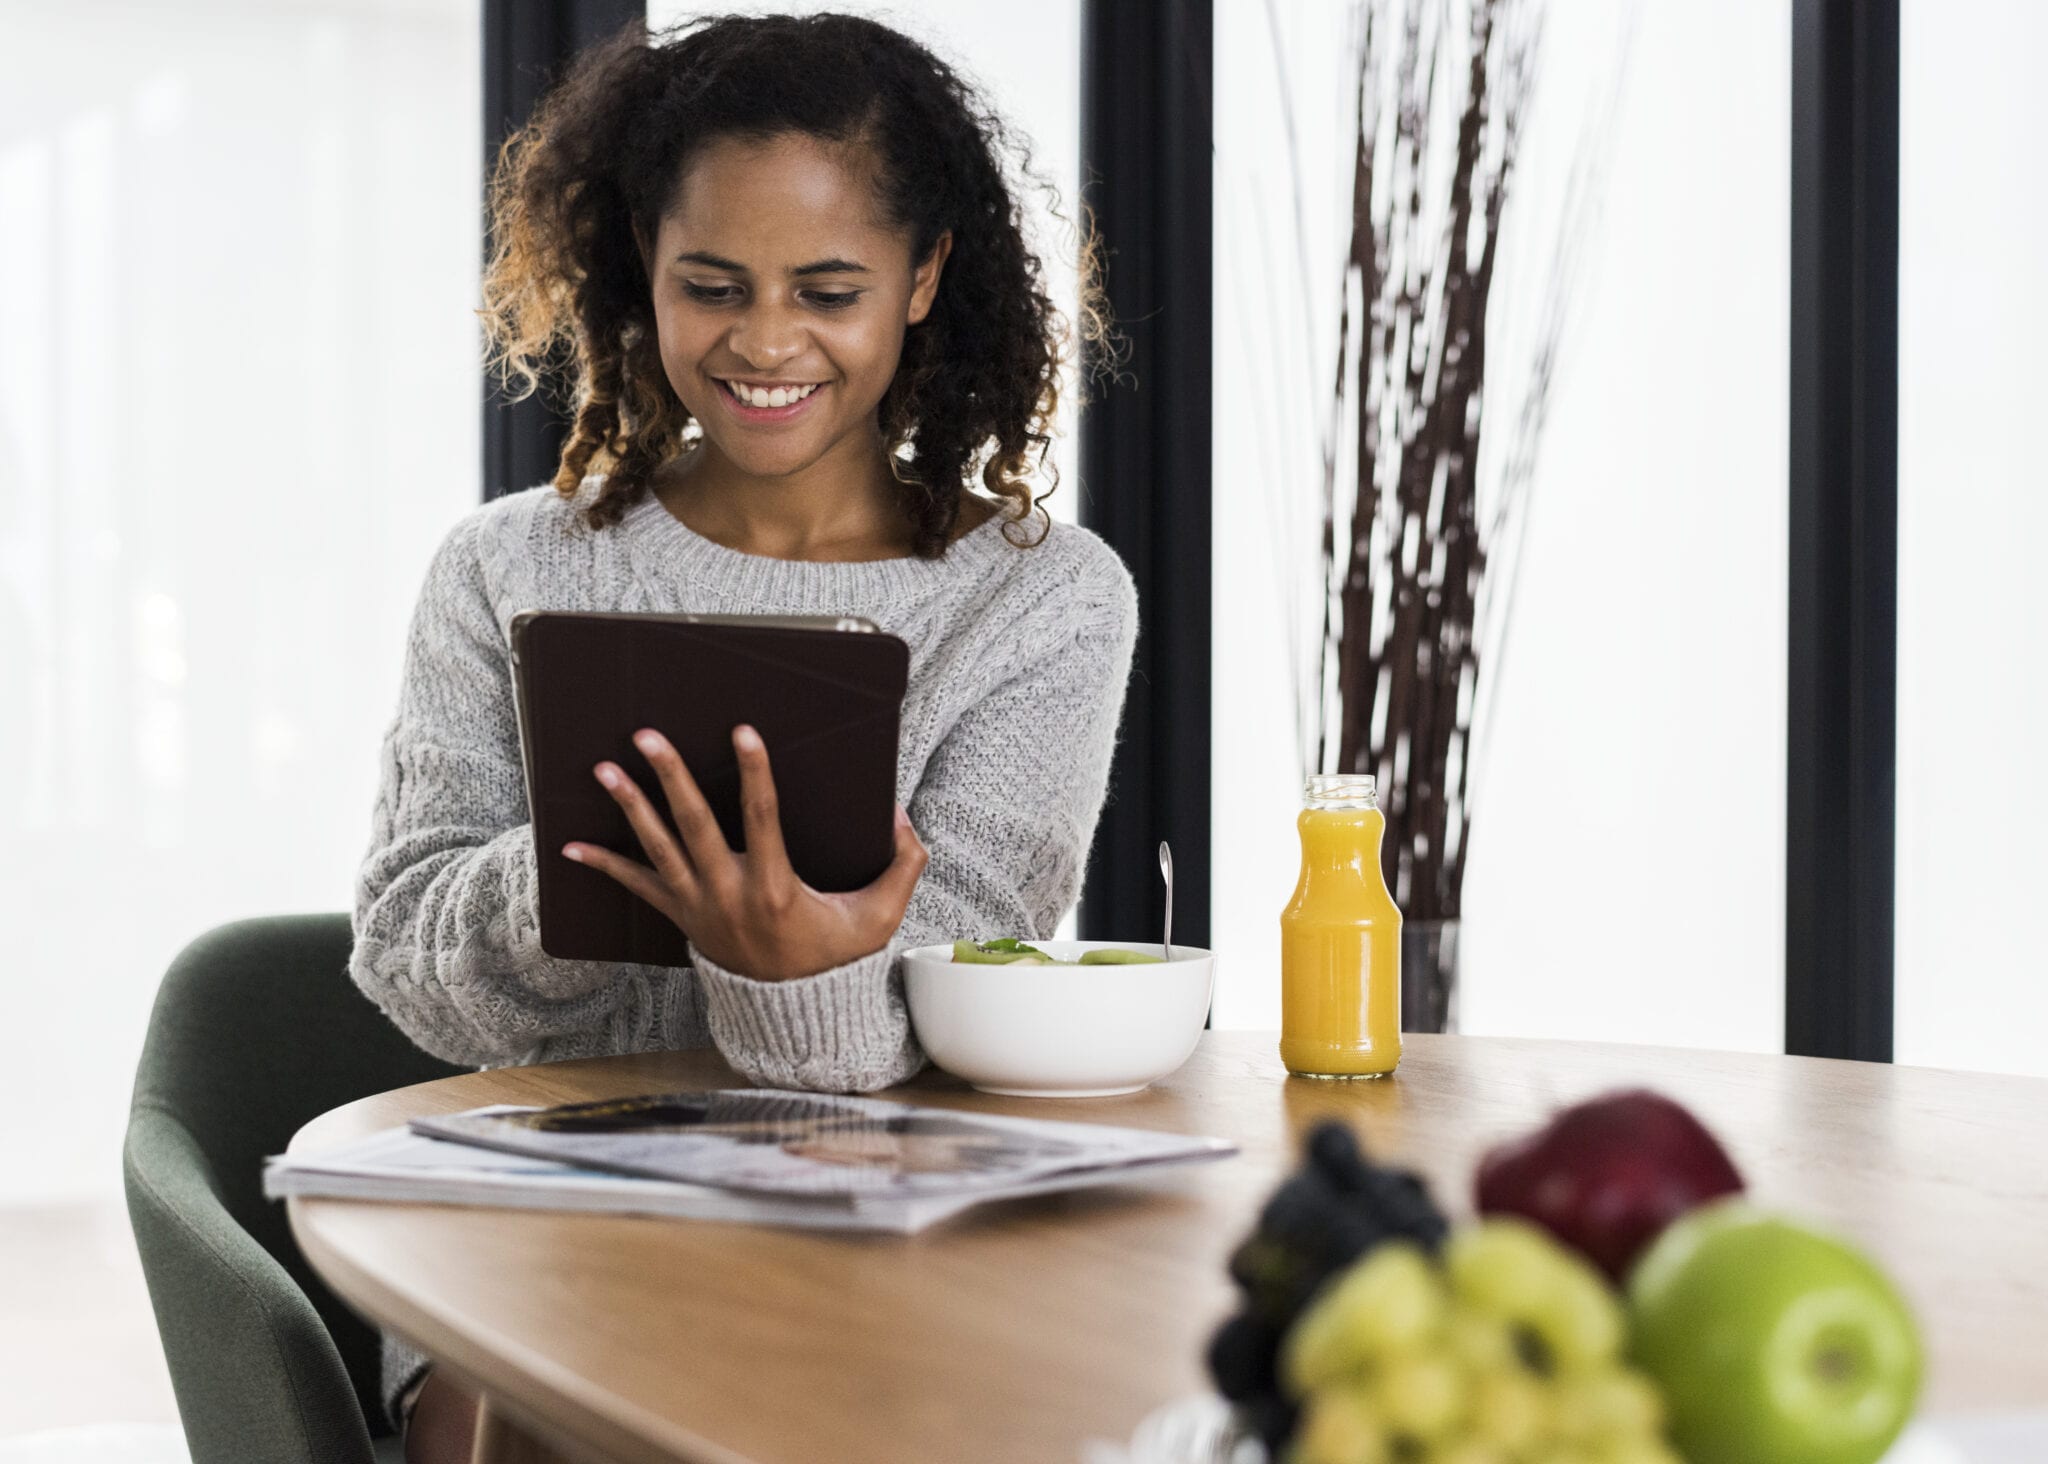 Healthy Lifestyle Woman Using A Tablet